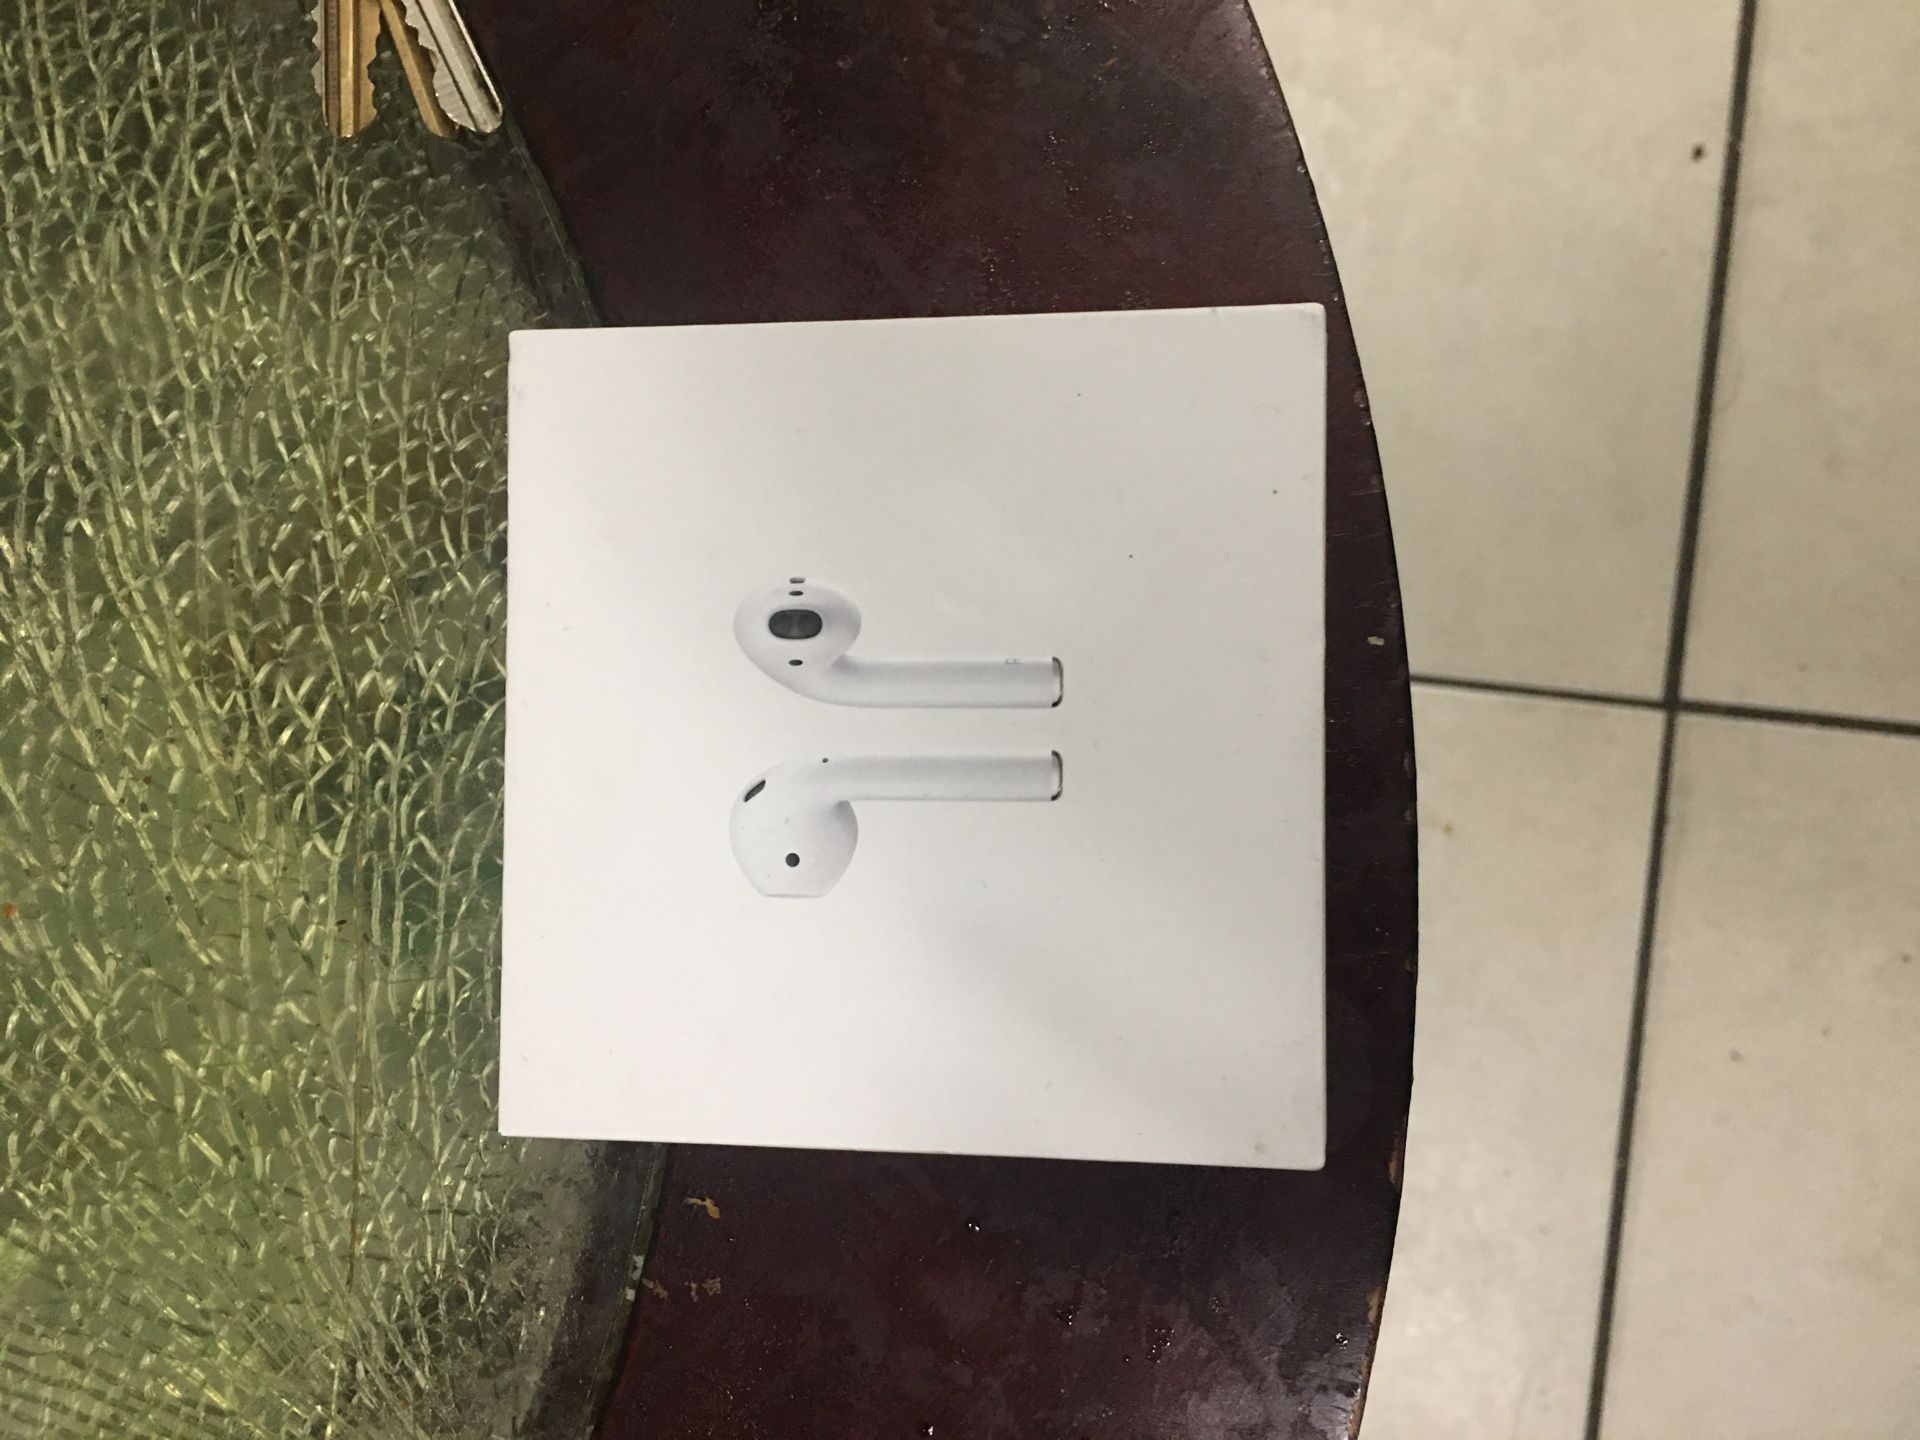 Apple air pods great condition works perfect almost brand new